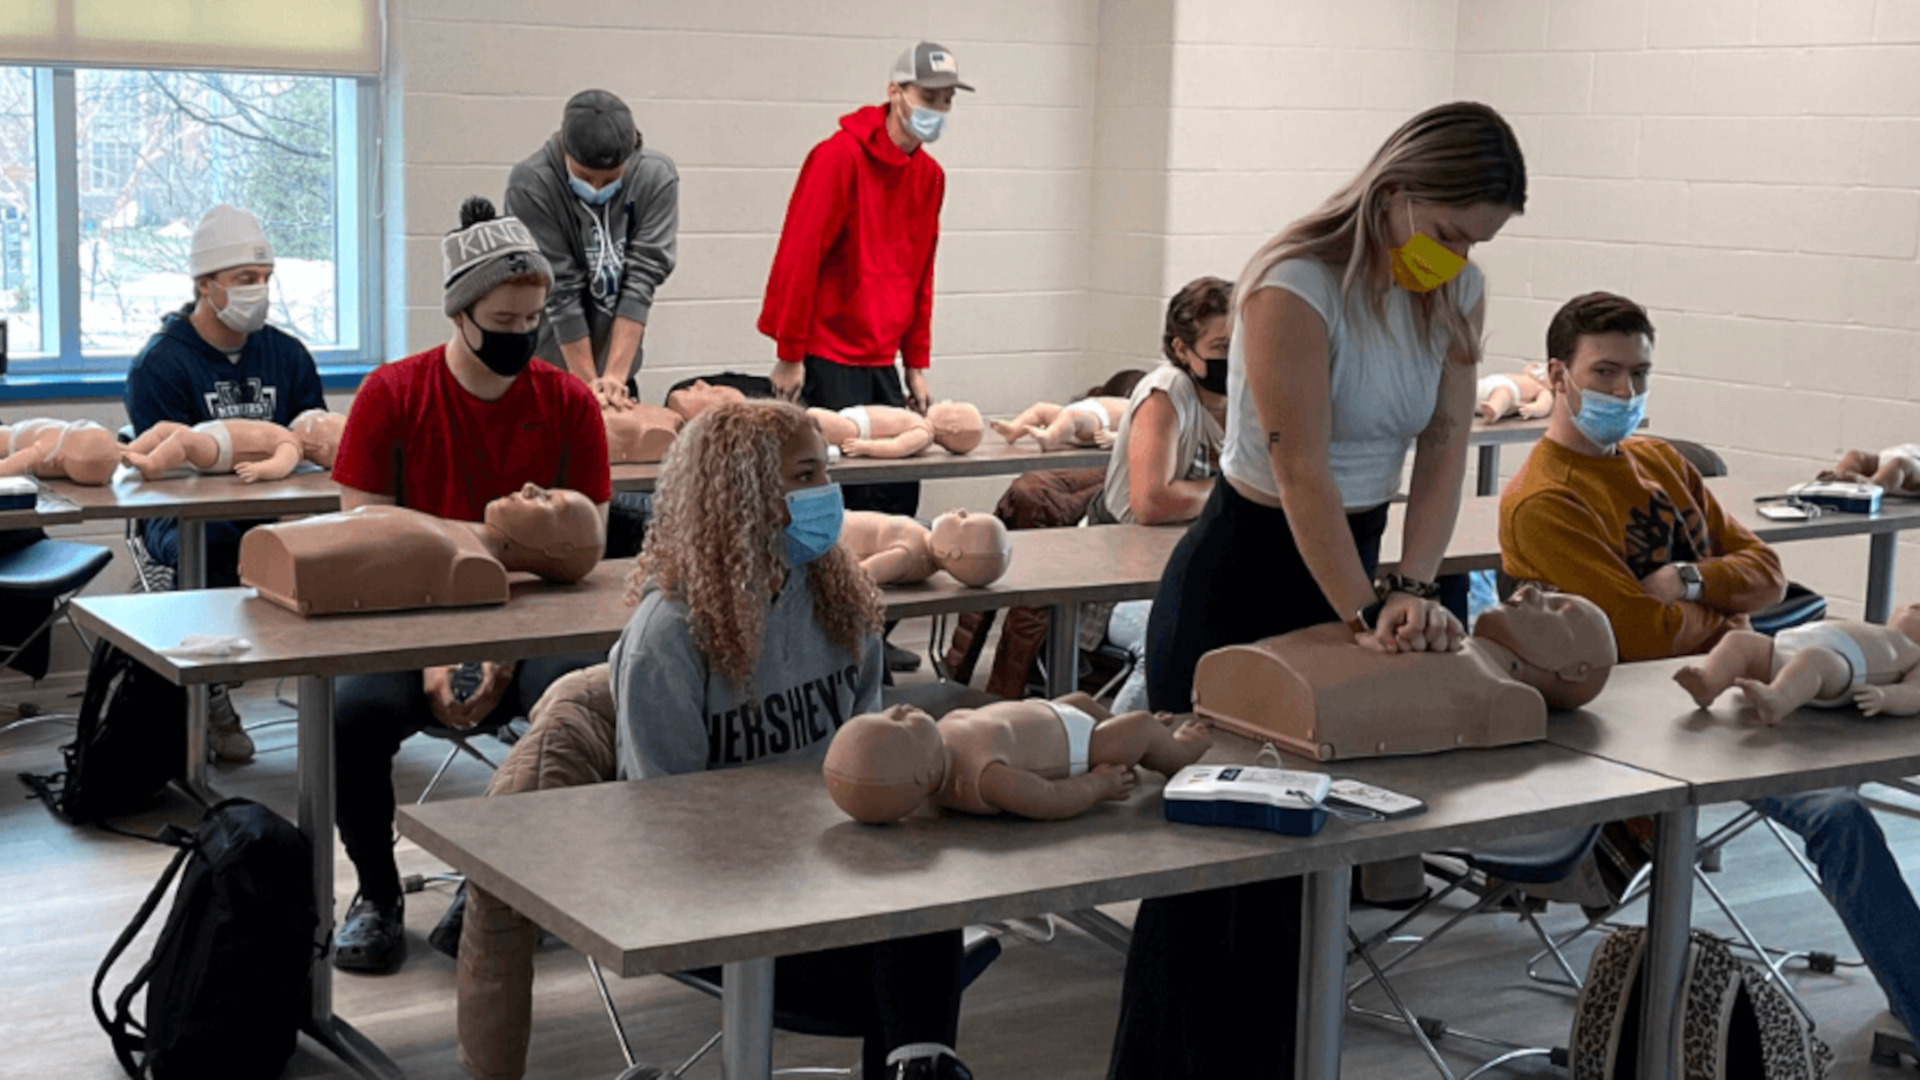 Students using dummies to practice life support training